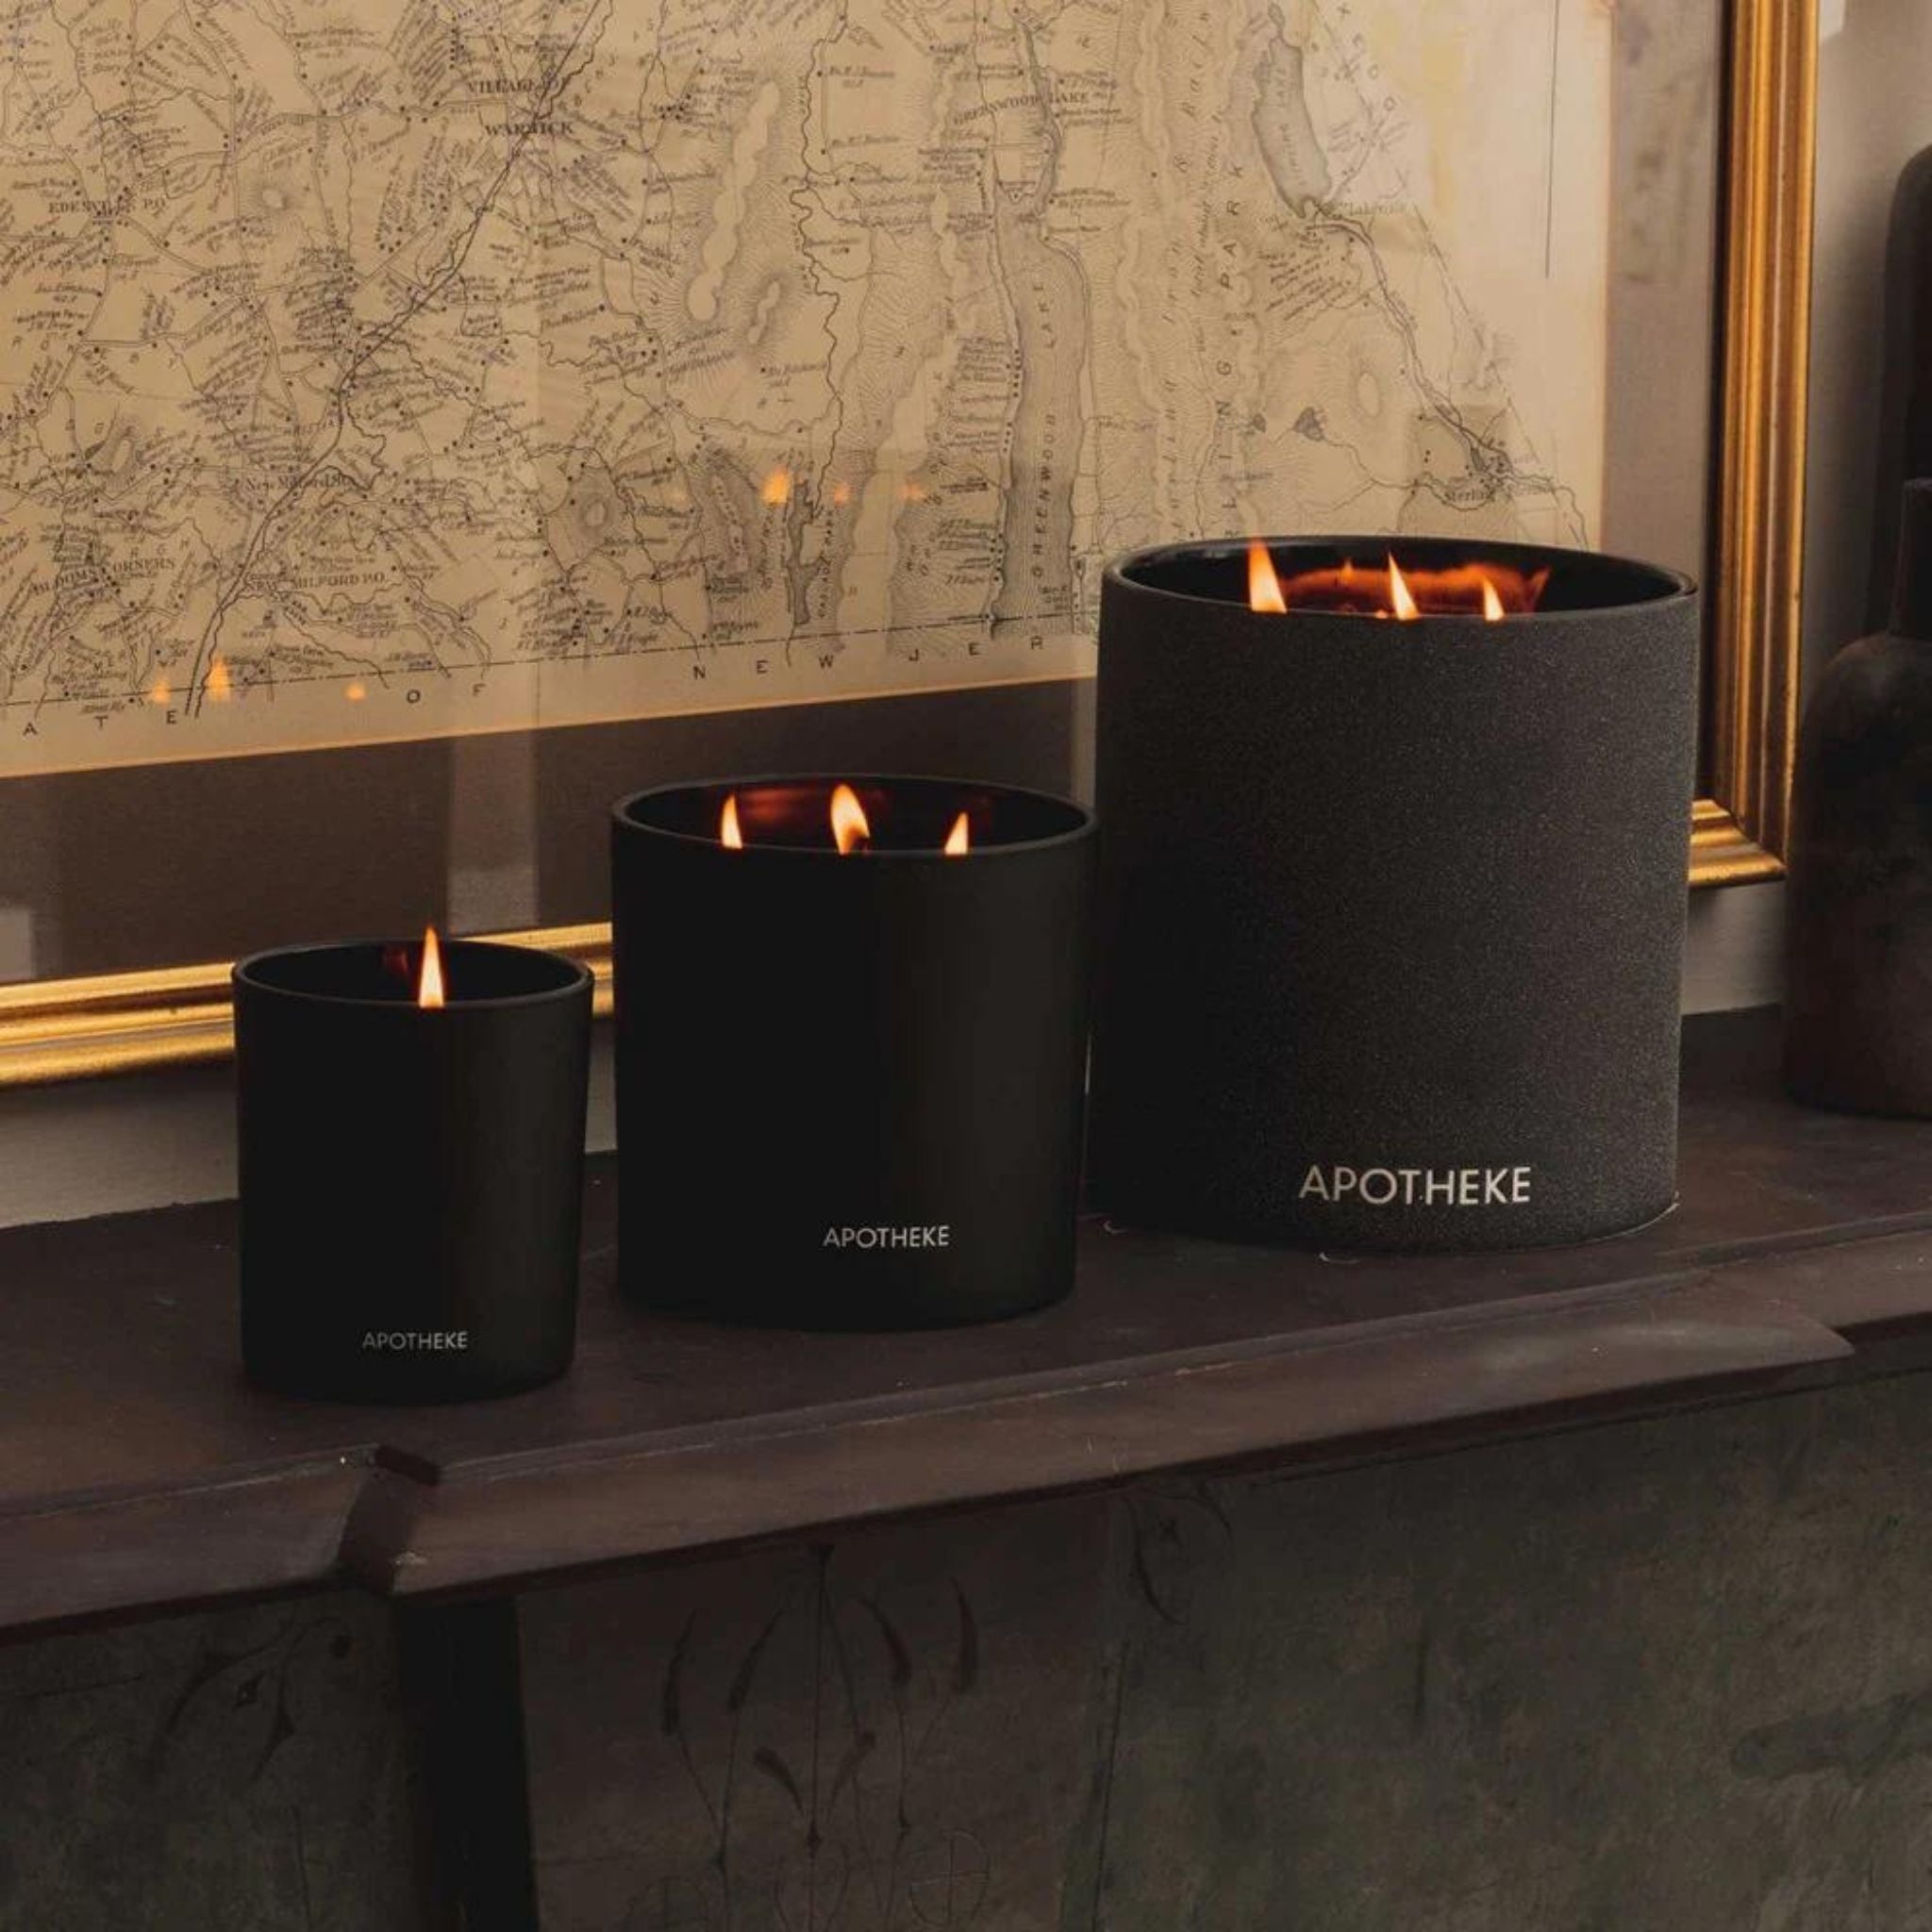 SIMPLY ELEVATED X APOTHEKE - Our number bestseller, Charcoal will instantly elevate any occasion. Featured in an extra-large concrete vessel, our Charcoal 4-Wick Candle is designed to enjoy both inside and outside your home. When lit notes of cedarwood and sandalwood blended with smokey amber and oud make Charcoal a broody full-bodied fragrance that everyone will fall in love with. Bring your favorite scent outdoors with our Charcoal 4-Wick Concrete Candle!